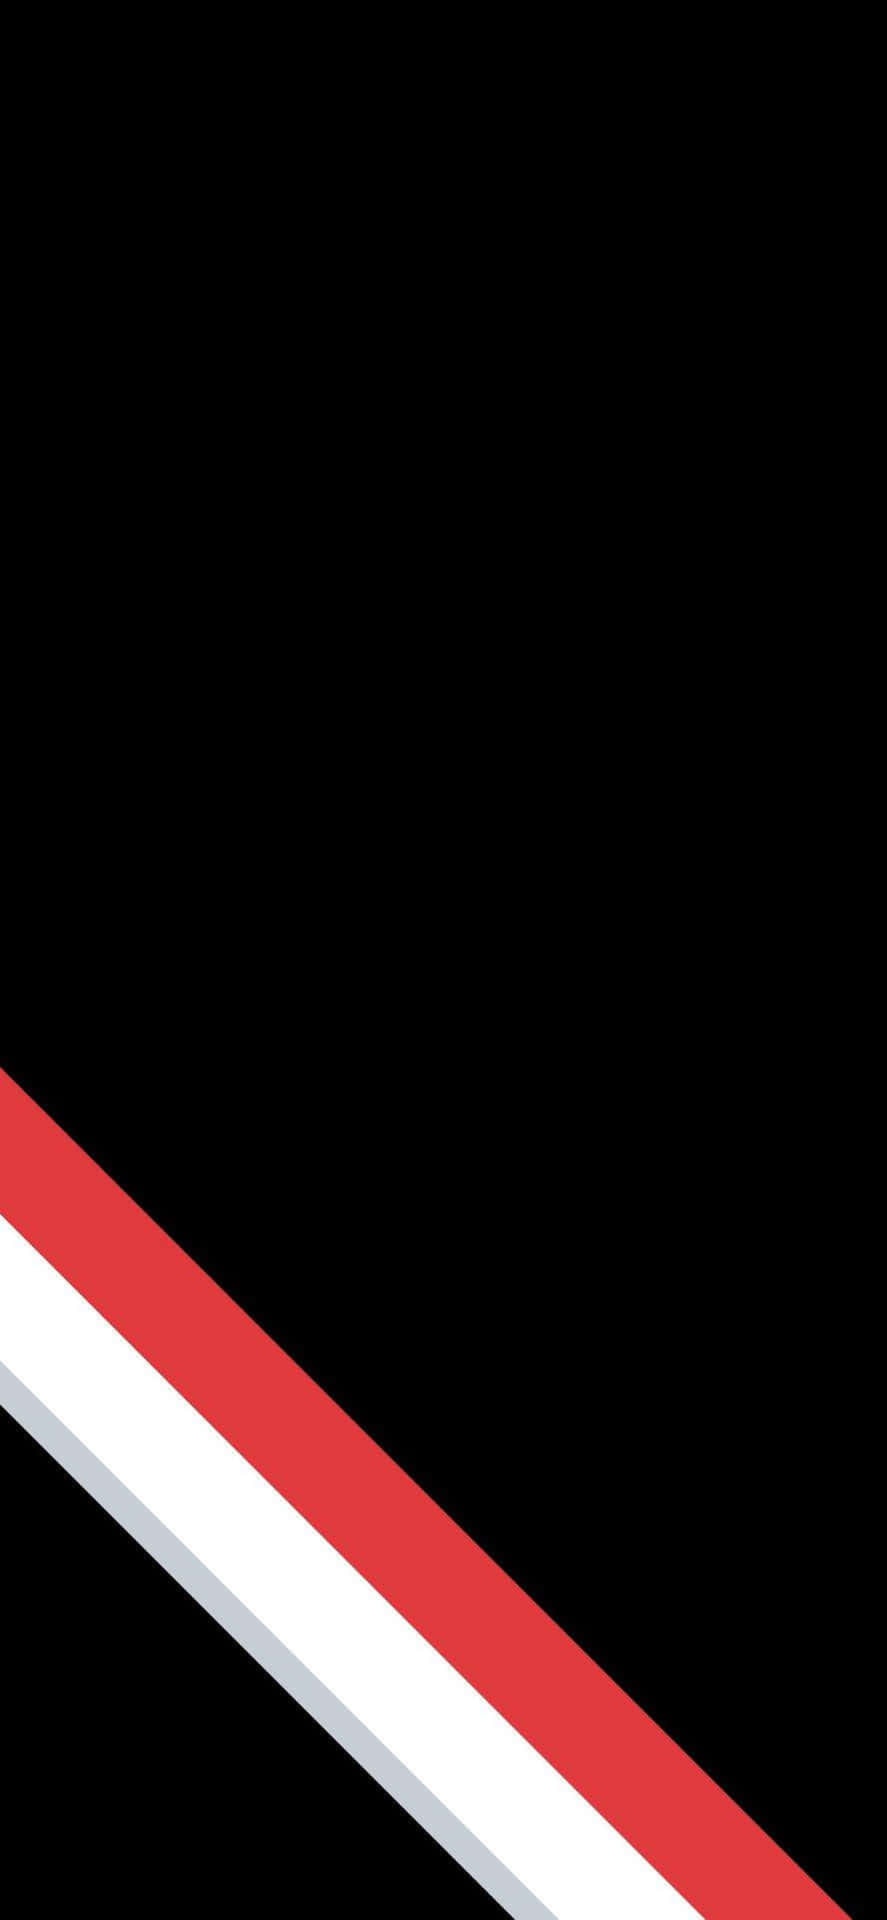 A Black And White Flag With A White And Red Stripe